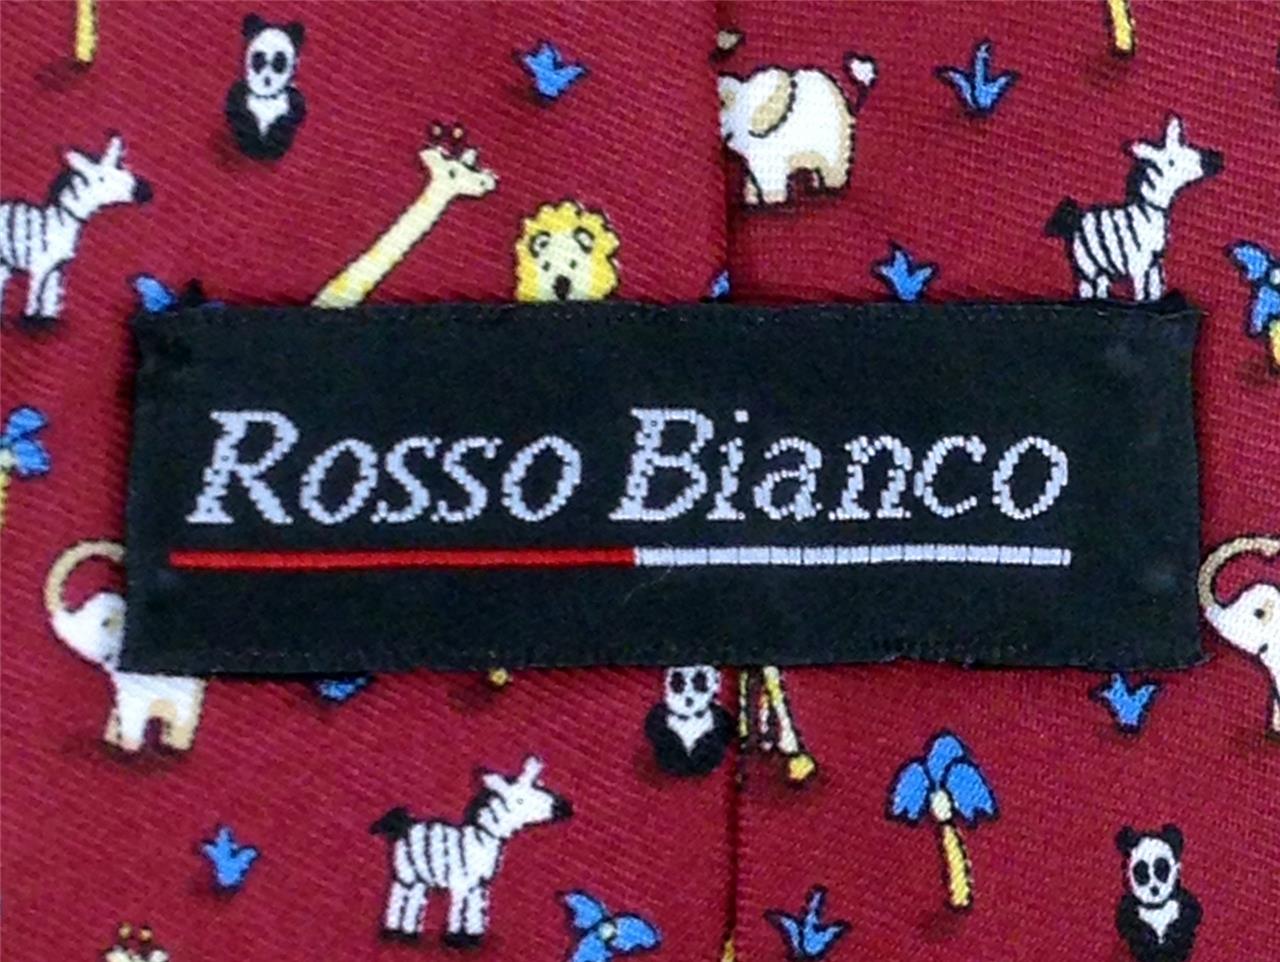 Rosso Bianco Tie Many Animal On Red Theme Novelty Repeat Silk Necktie Incredibleties Com